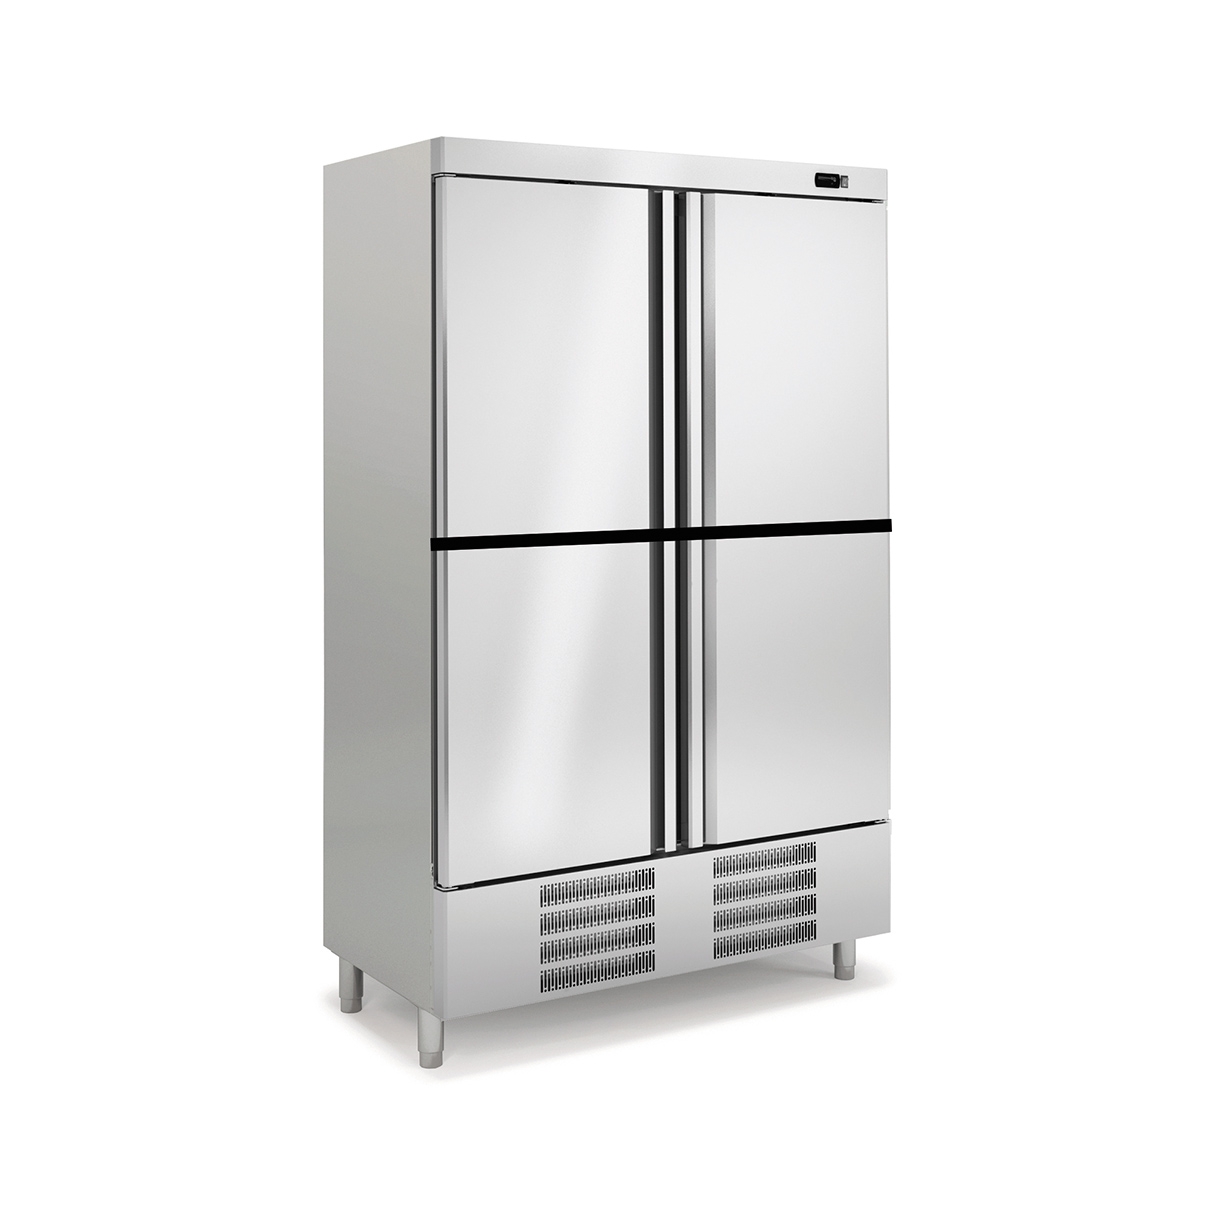 SNACK Refrigerated Cabinet ASD-125-4